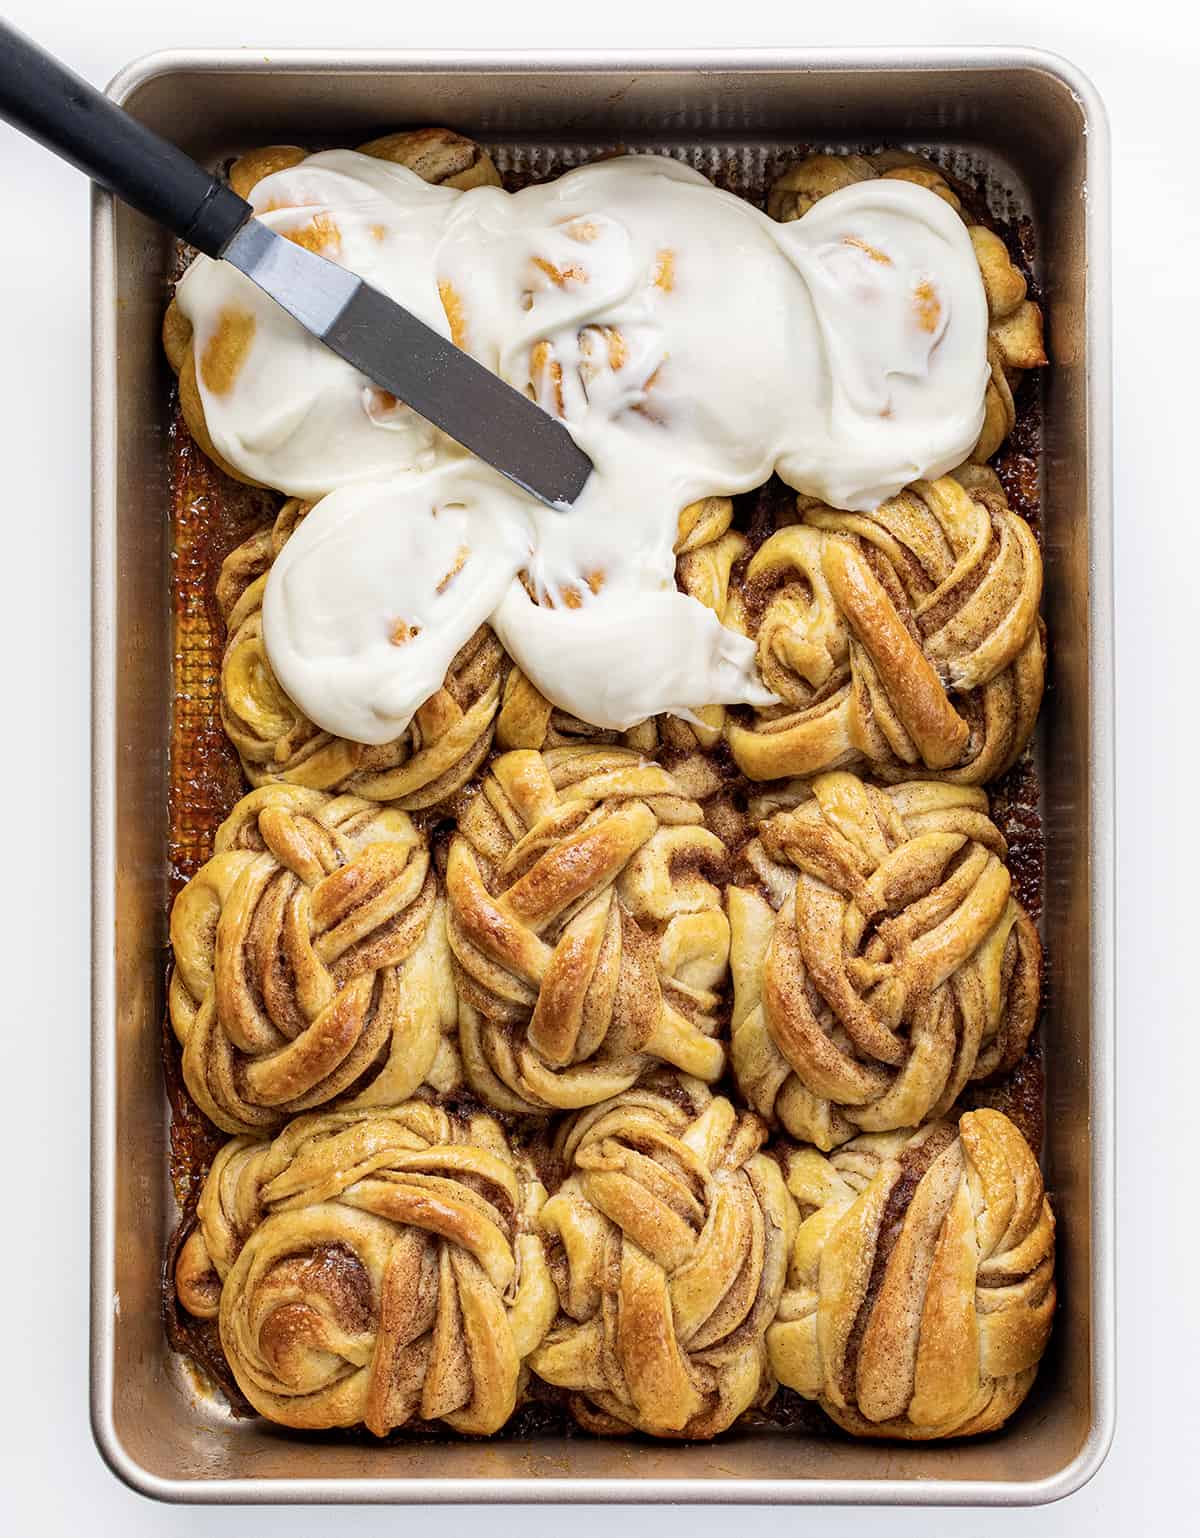 Braided Cinnamon Rolls in Pan After Baking Showing Them Partially Frosted. 